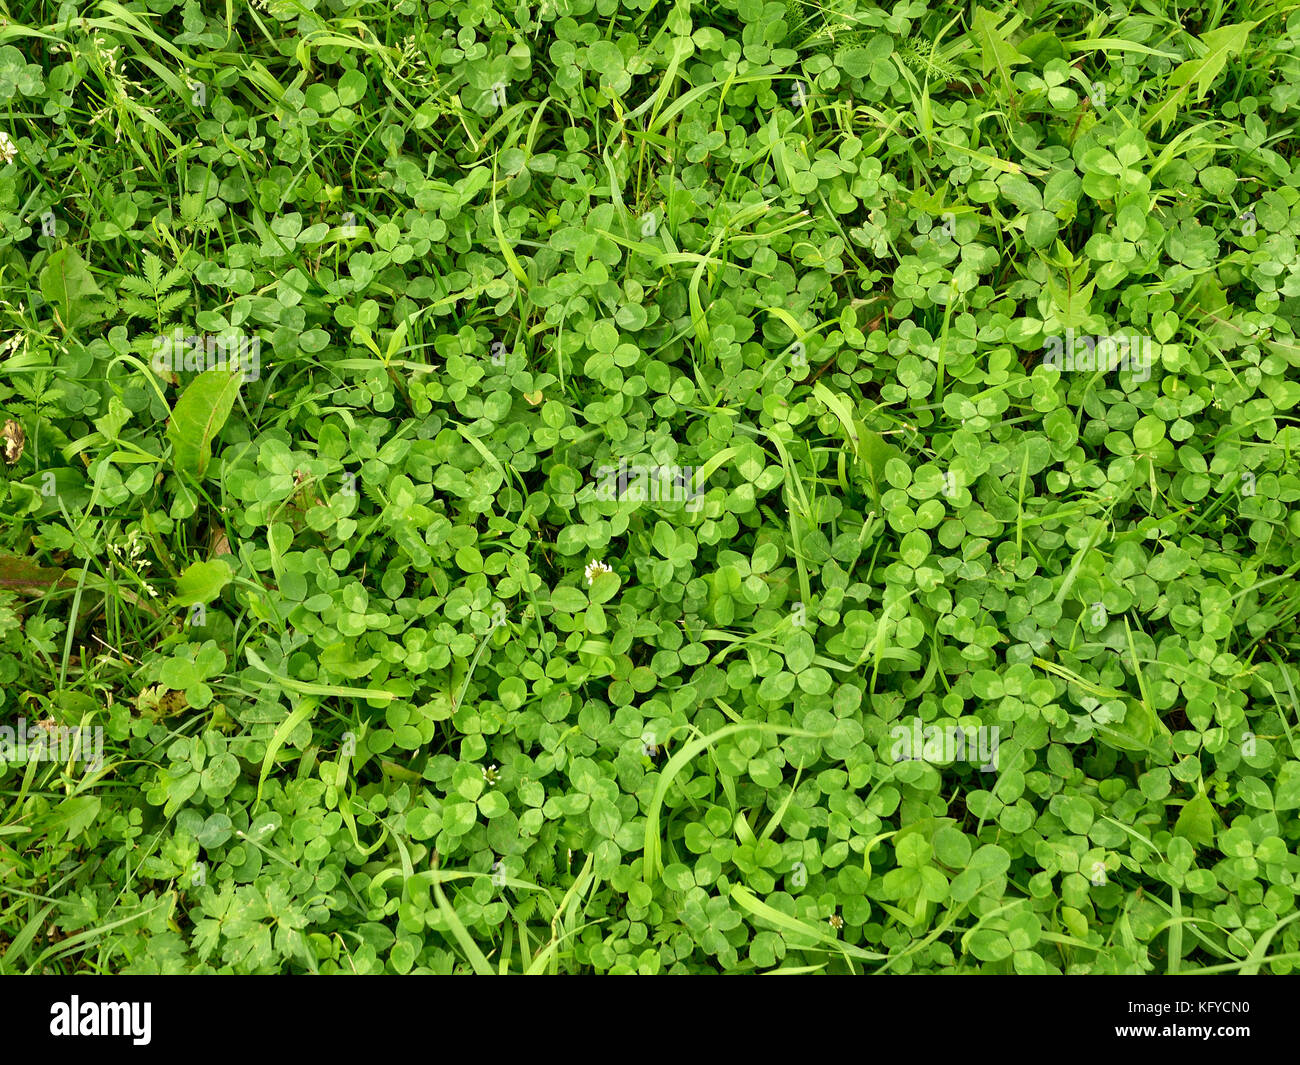 Silenen grass,various species growing on the field. Stock Photo